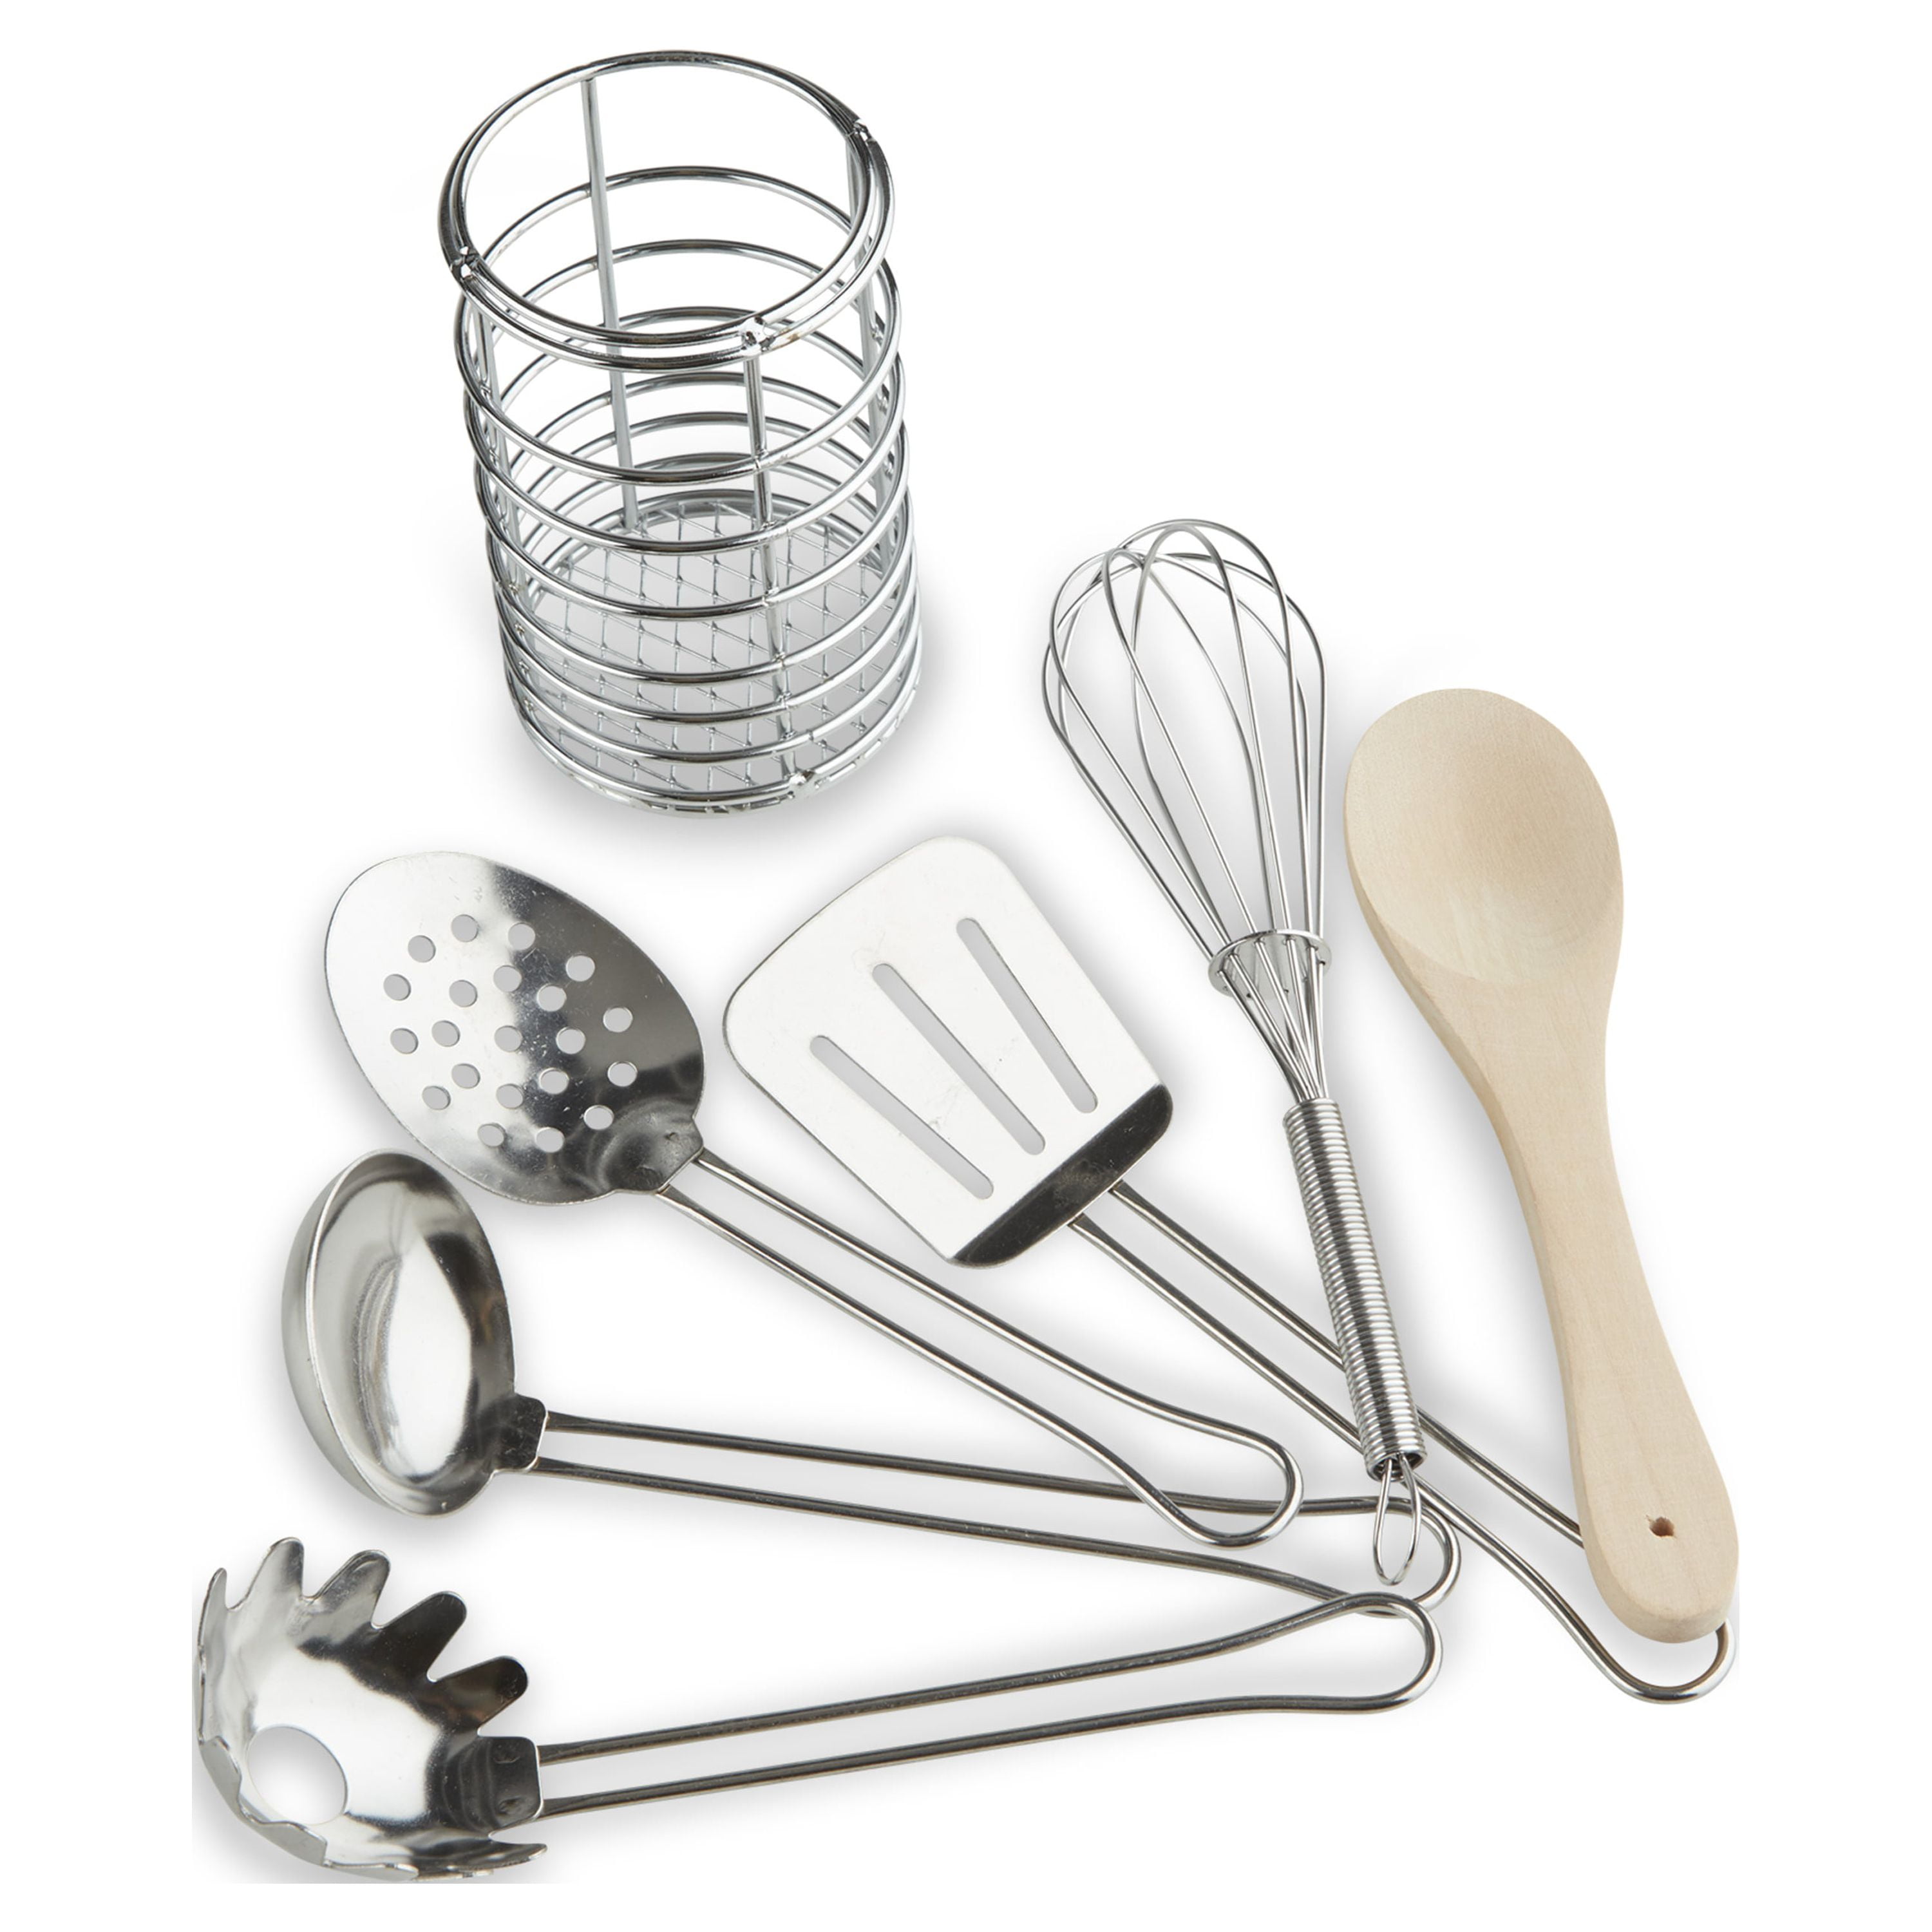 Melissa & Doug Stir and Serve Cooking Utensils (7 pcs) - Stainless